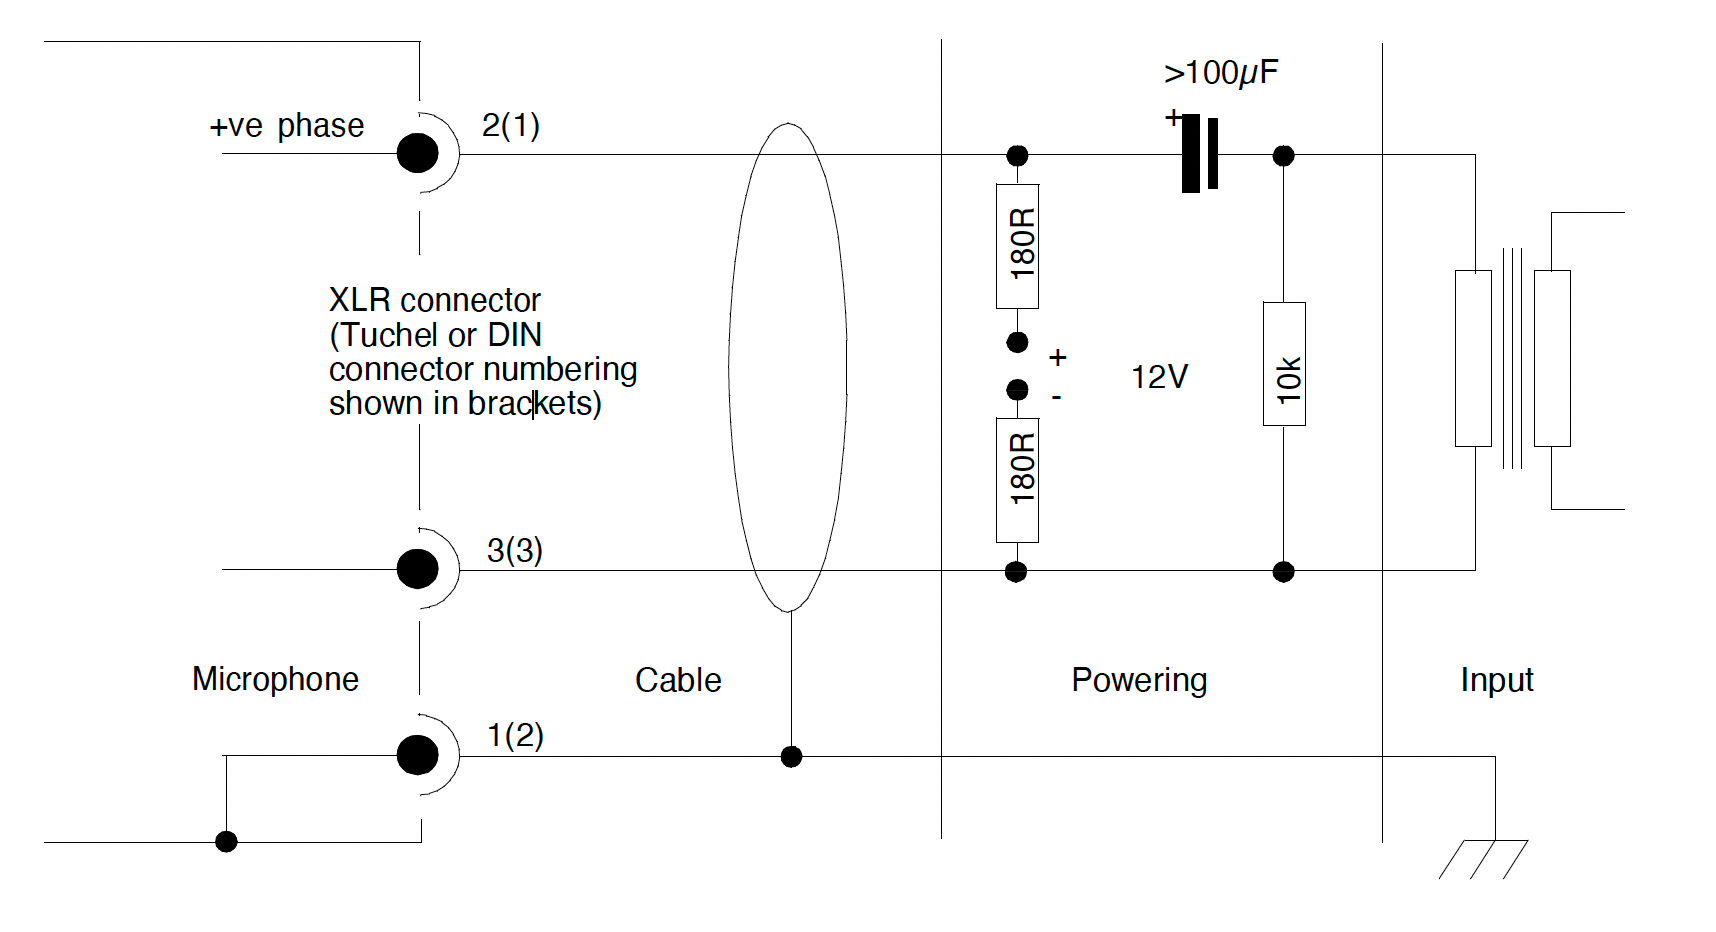 T-Power or parallel powering configuration